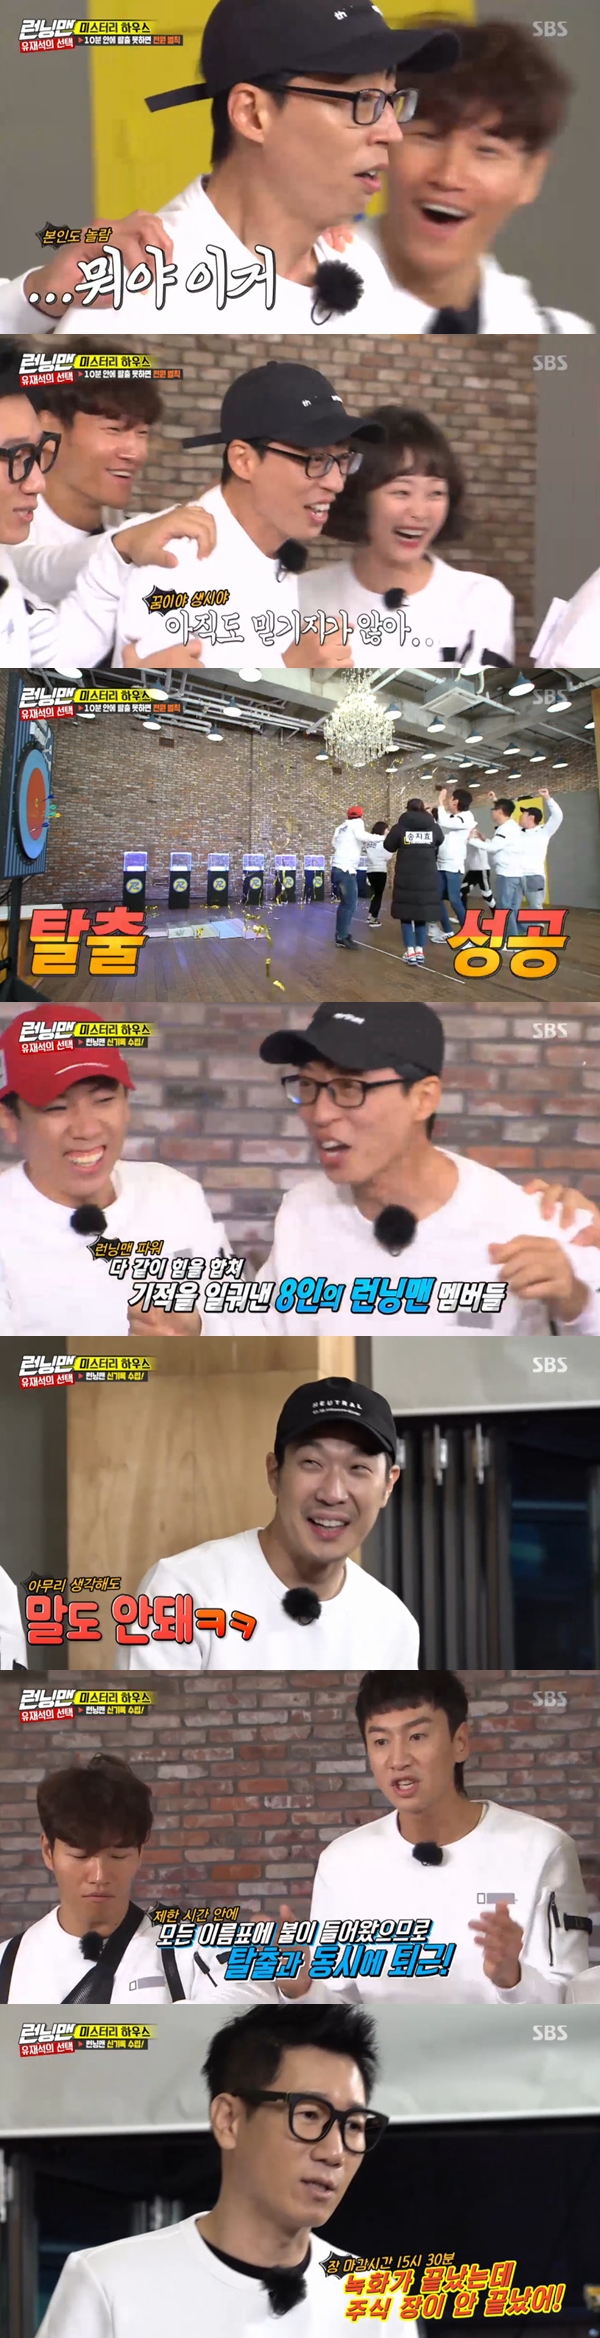 Running Man eight years have not been ignoredOn SBS Running Man broadcast on November 18th, How much do you know Running Man?, which gives a glimpse of the teamwork of the members, was released.On the day, the members of the eight members had to choose one of the members who knew best about the Running Man members as soon as they started.It was important that the same persons name was released simultaneously from the mouths of eight people; fortunately the members unanimously pointed to National MC Yoo Jae-Suk.Members who have been together for eight years said they know each other too well at the production team and Interview.Lee Kwang-soo said he knew so well that he kept the secrets that should not be revealed, and Haha boldly disclosures the love history of Kim Jong-kook and Yang Se-chan.Haha said: My Choices are my Yoo Jae-Suk brother, most active and well-connected with members.Ji Suk-jin, who has been a close friend since he was unknown for about 30 years, has been with me for a long time.Kim Jong-kook has been together since X-Men, he pointed out Yoo Jae-Suk.Kim Jong-kook said, Ji Suk-jin does not know one about the members, he said, but Yoo Jae-suk has faithfully played the role of leader.Yang Se-chan also said, Yoo Jae-Suk brother knows not only Running Man but also everything.There are rumors that there are more than 10 TVs in the house, explained why he chose Yoo Jae-Suk.Notable is that Yoo Jae-Suk also identified himself as the best-known member of the Running Man leader.As a result, Yoo Jae-Suk has the authority to decide on the mission member as his Choices.When all seven people succeed, they will be immediately taken home from work, and if they fail, all members will be dragged to the final place.The missions of the day were generally successful: Ji Suk-jin, who became the first mission performer, flipped the ticket at once, and Lee Kwang-soo hit the nonsense problem.However, Haha failed to answer the common sense quiz and was dragged into the mystery house.The members in crisis were paralyzed thanks to the great success of Yoo Jae-Suk.In the mission to receive a former One penalty if you dont escape within 10 minutes of the mystery house, Yoo Jae-Suk hit the darts, and the members cheered.This was the Running Man power. All eight members worked together to create a miracle.Members who have come to a record short time work with a miracle hit.Because all the name tags were on fire within the time limit, the members who left the office at the same time as the escape were embarrassed at the short recording time of the past.In particular, Song Ji-hyo, who joined late, left work in nine minutes after work, and Ji Suk-jin said, The recording is over, but the Share chapter is not over.Have you ever done this? he said, laughing.